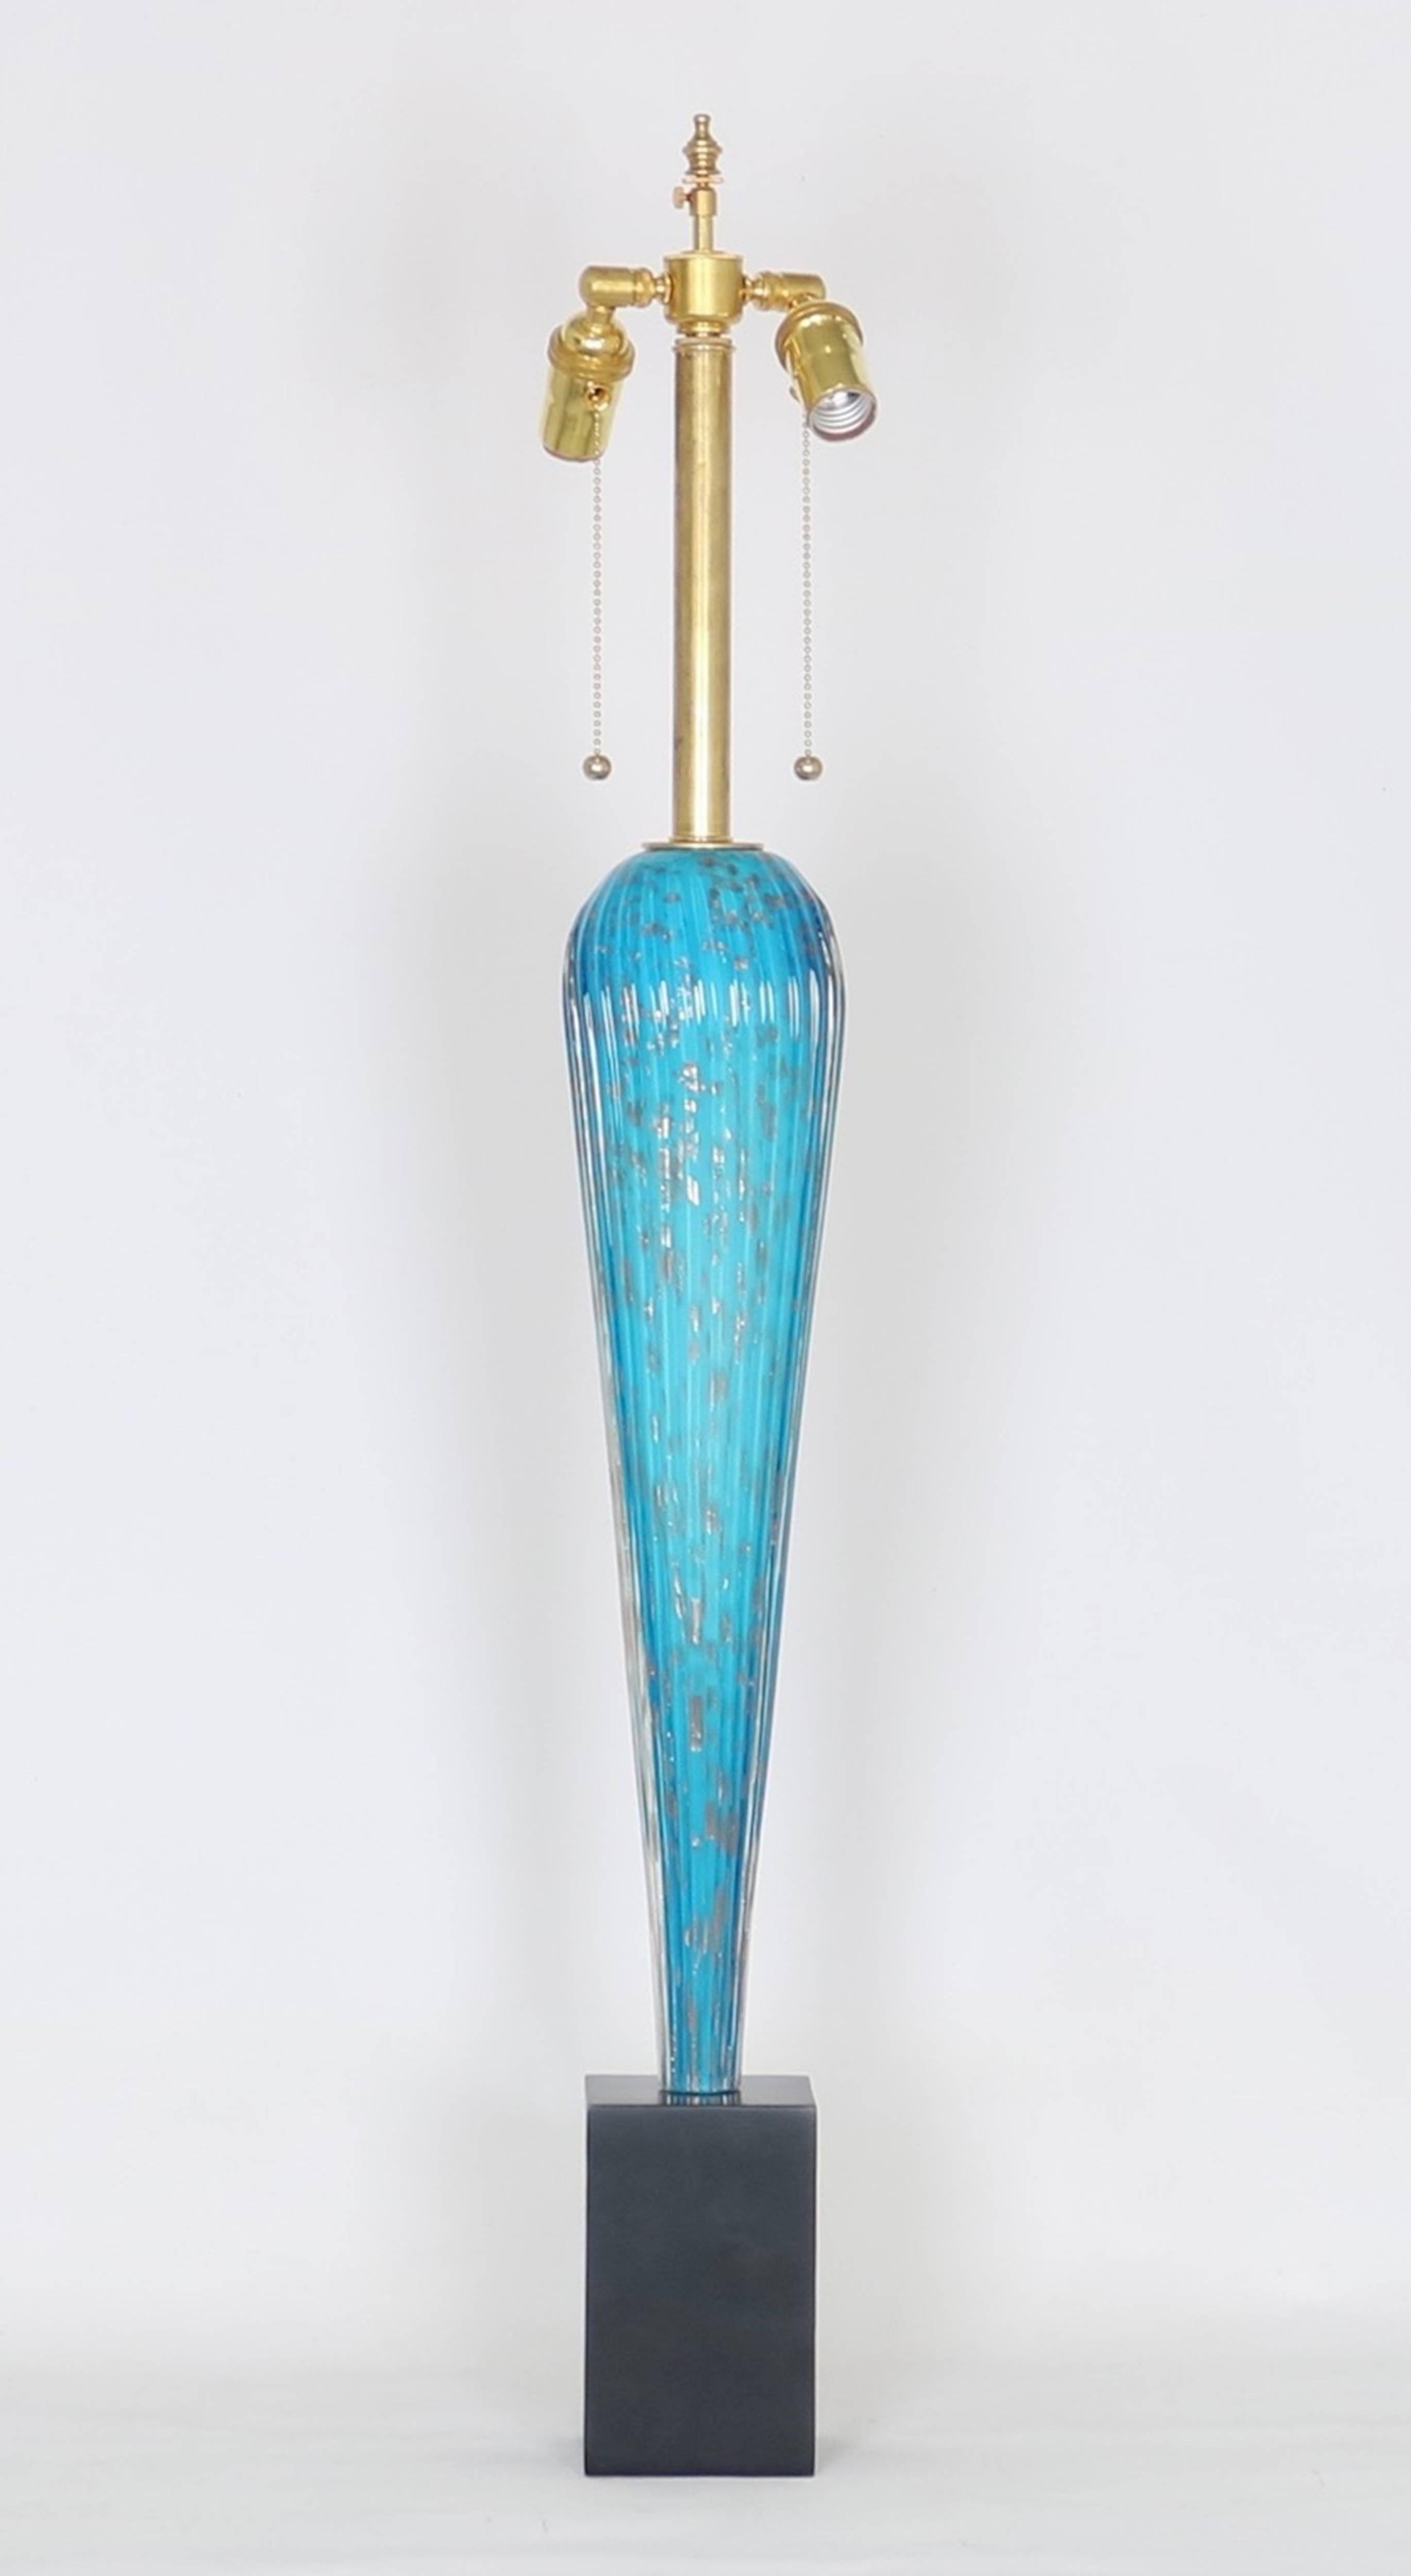 Barovier Murano glass table lamp on ebonized stand. Features a tapered ribbed glass body half in bright blue glass and the other half in white glass. Flecked with copper throughout . Fully restored with all new wiring and hardware including a double